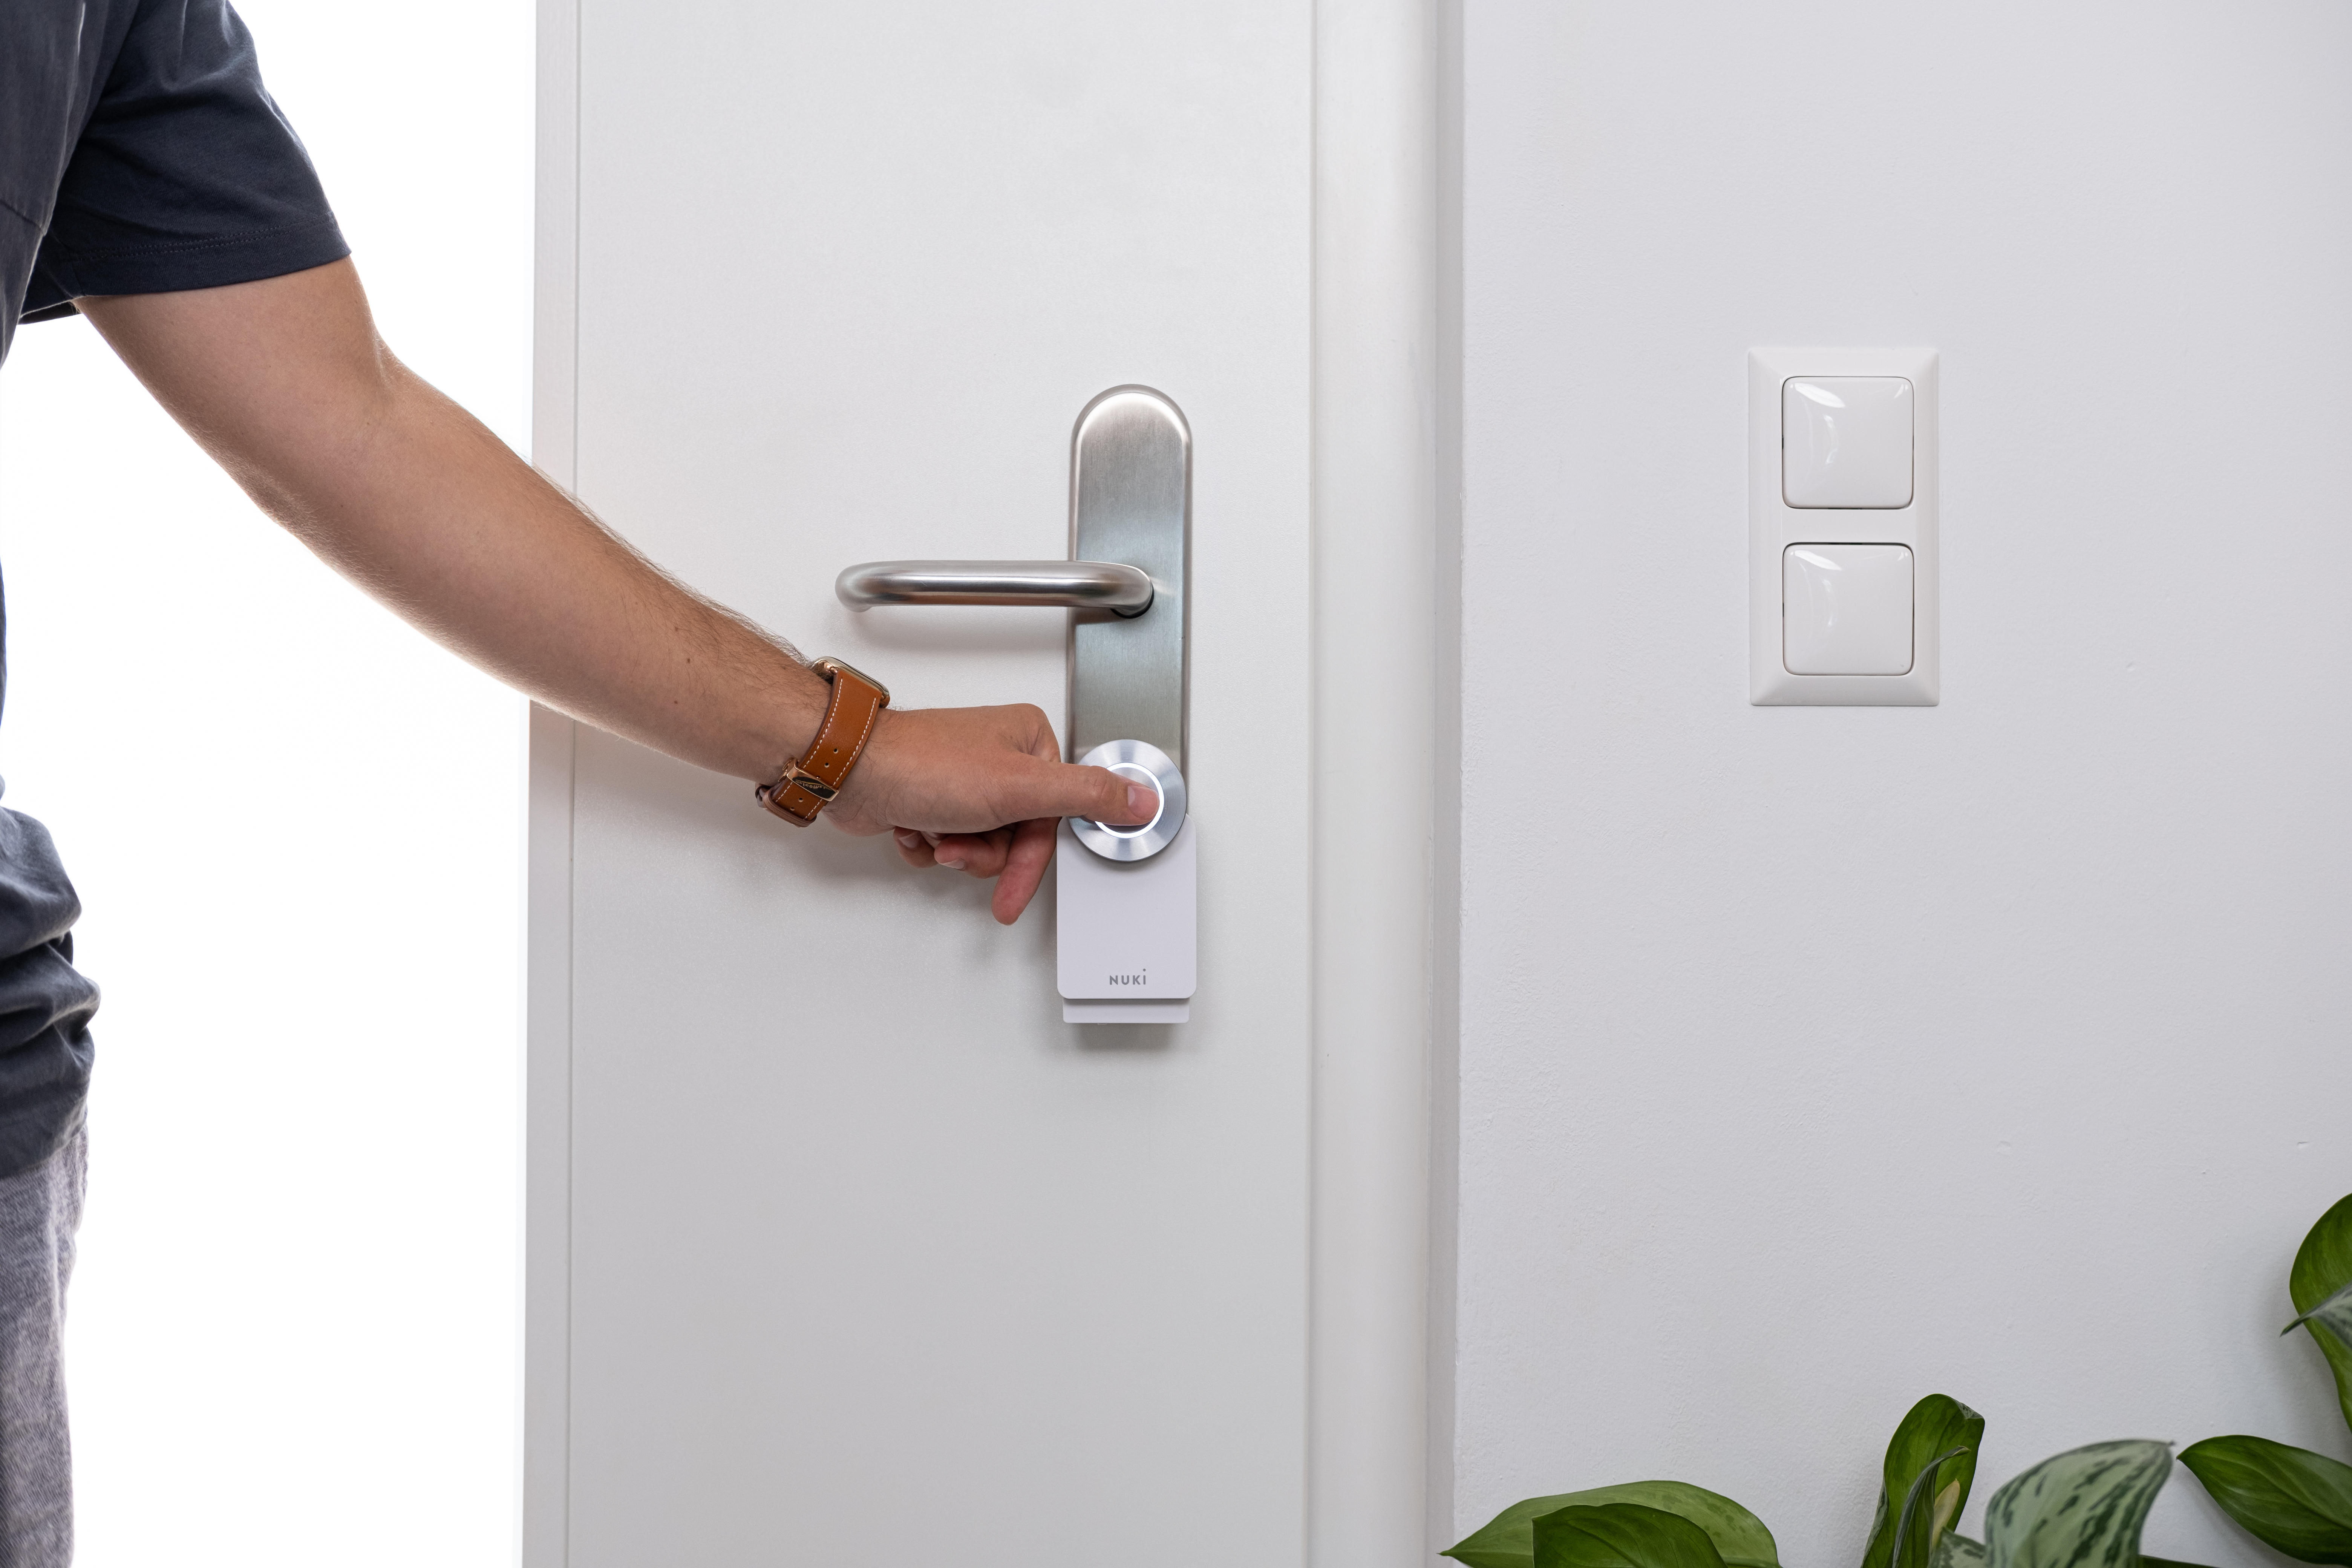 Nuki rotary know for your Smart Lock